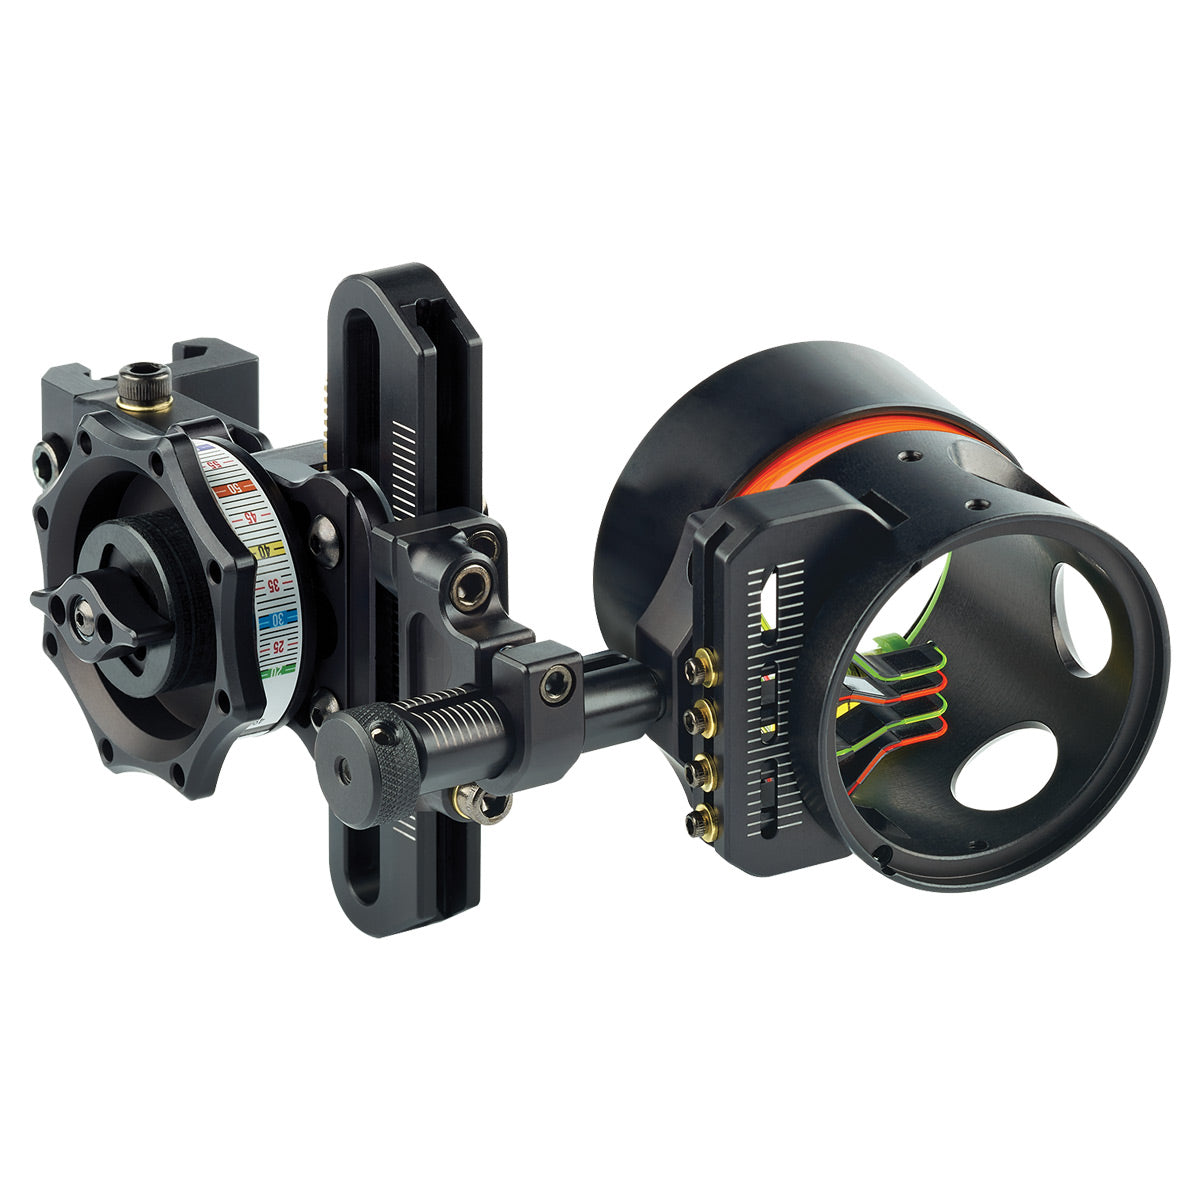 HHA Tetra 4 Pin Hoyt Edition Bow Sight in  by GOHUNT | HHA - GOHUNT Shop